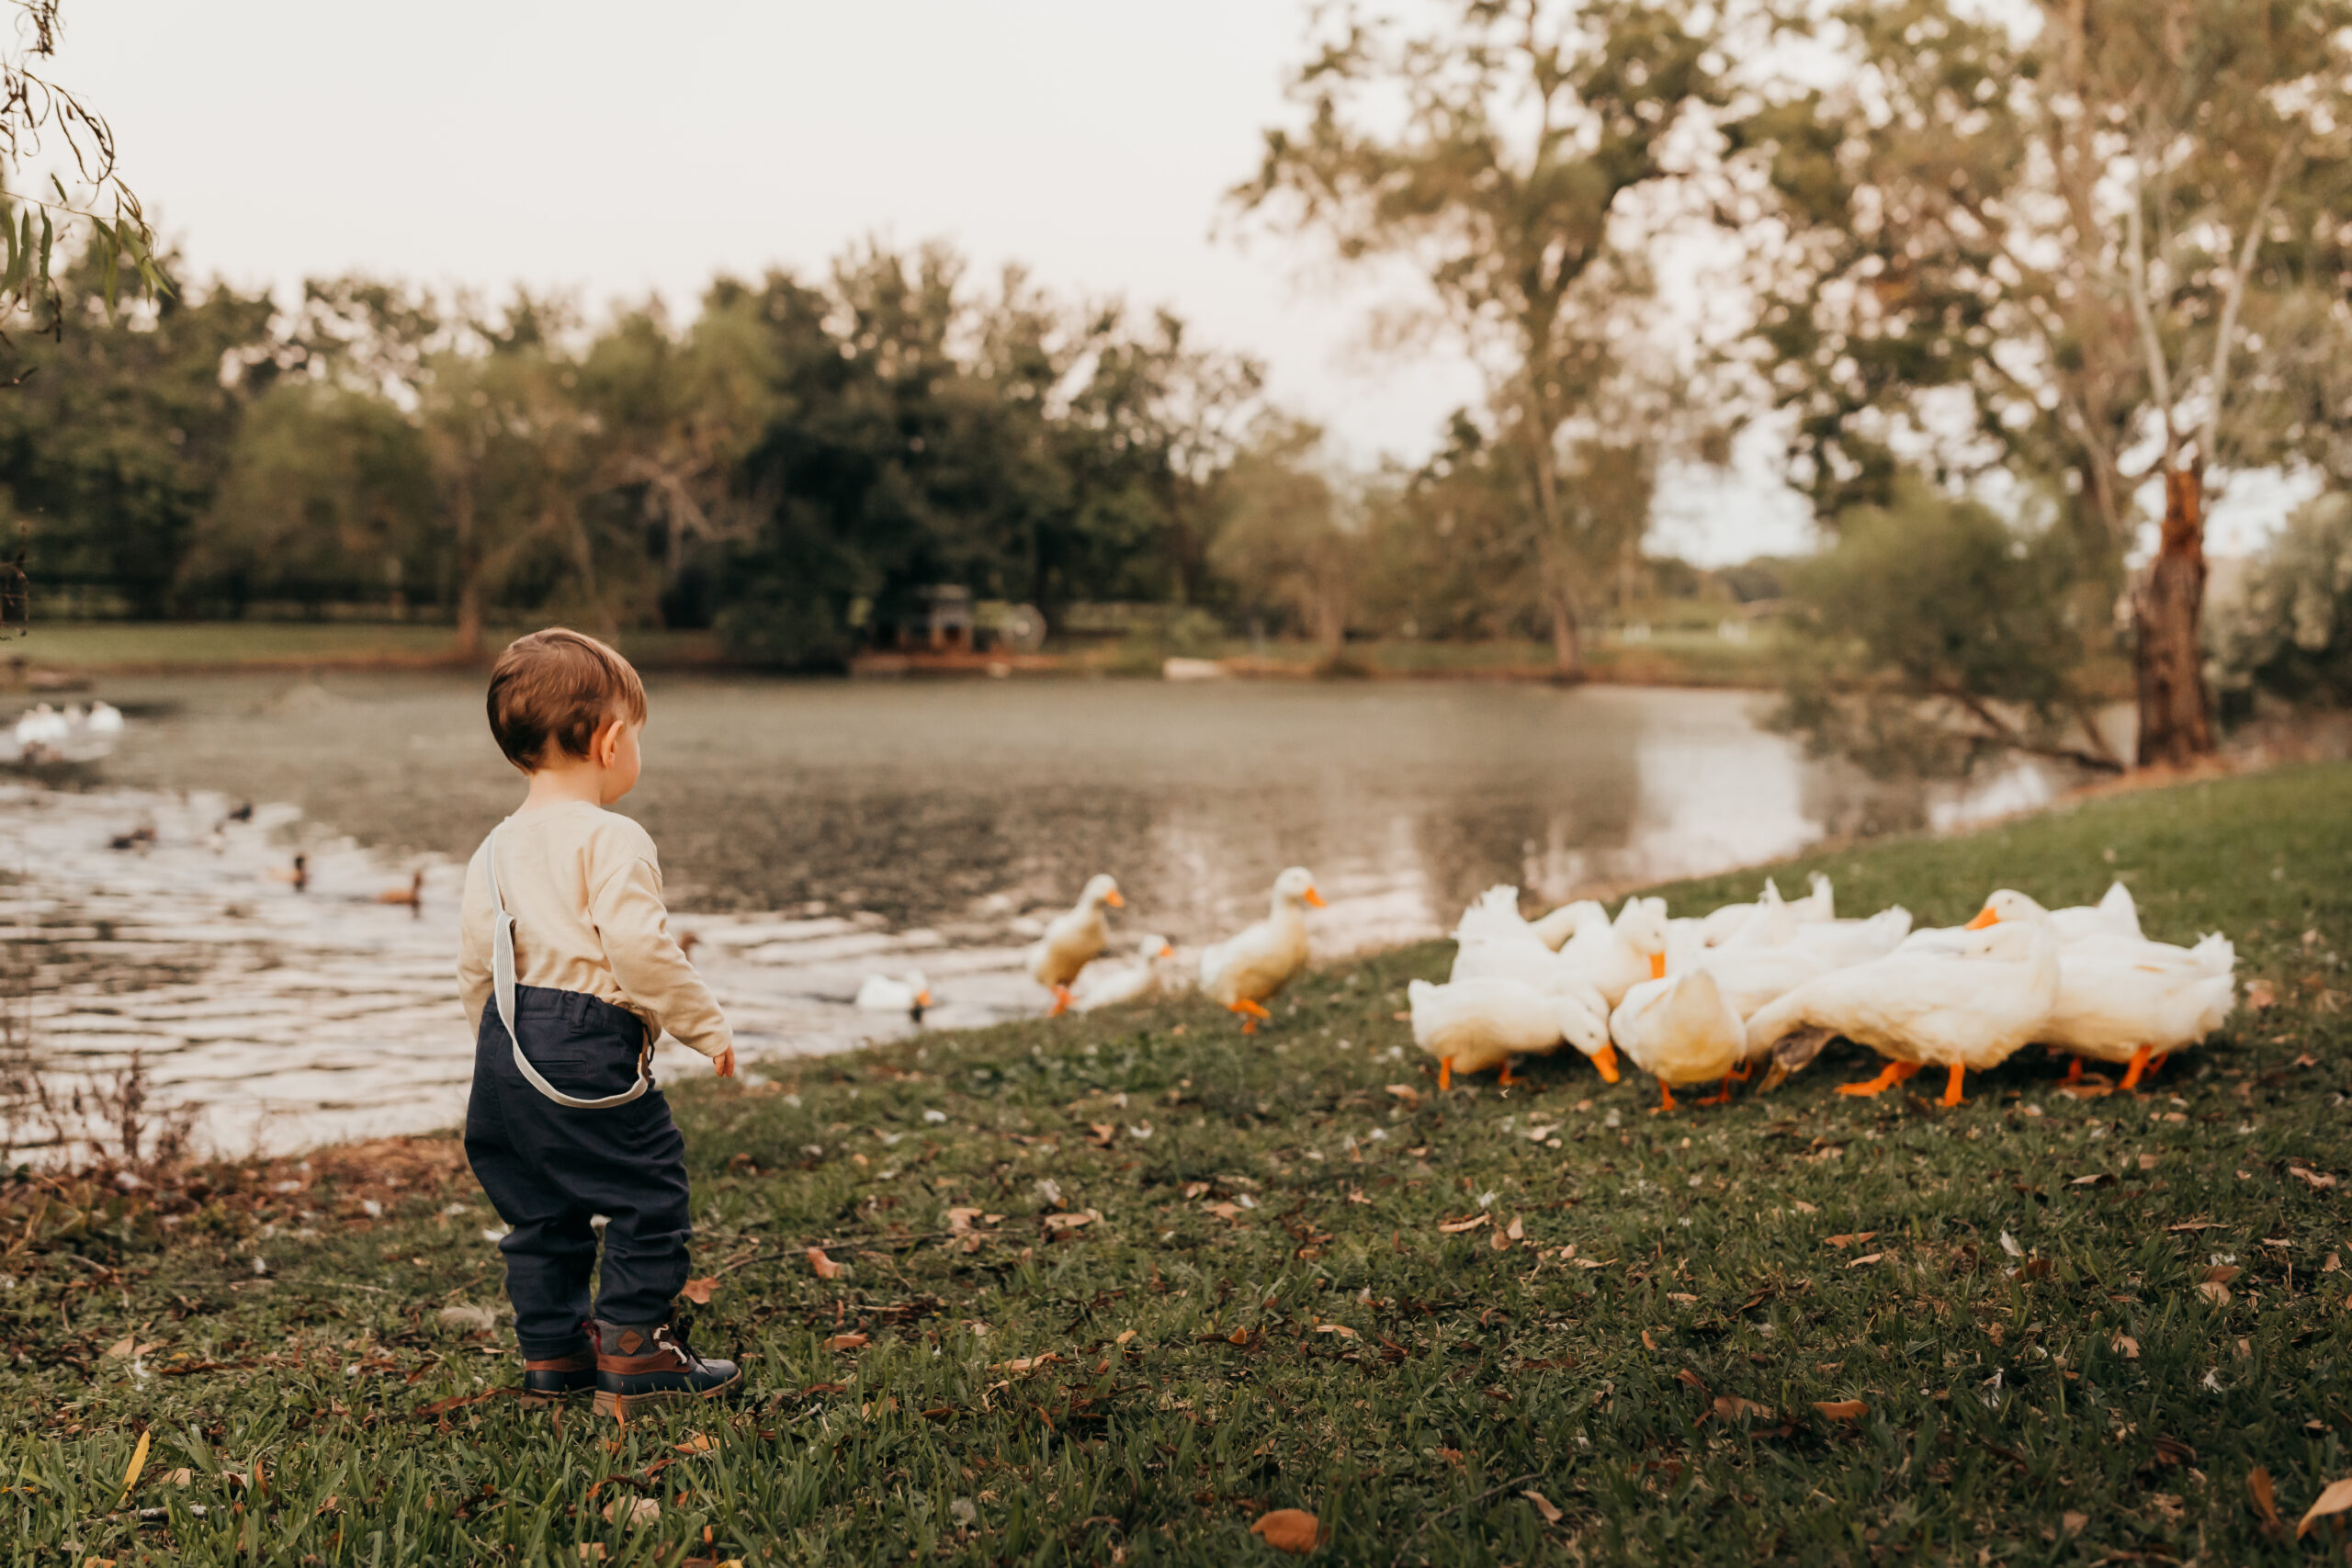 How to choose a family photographer is not a problem this toddler feeding the ducks is having.